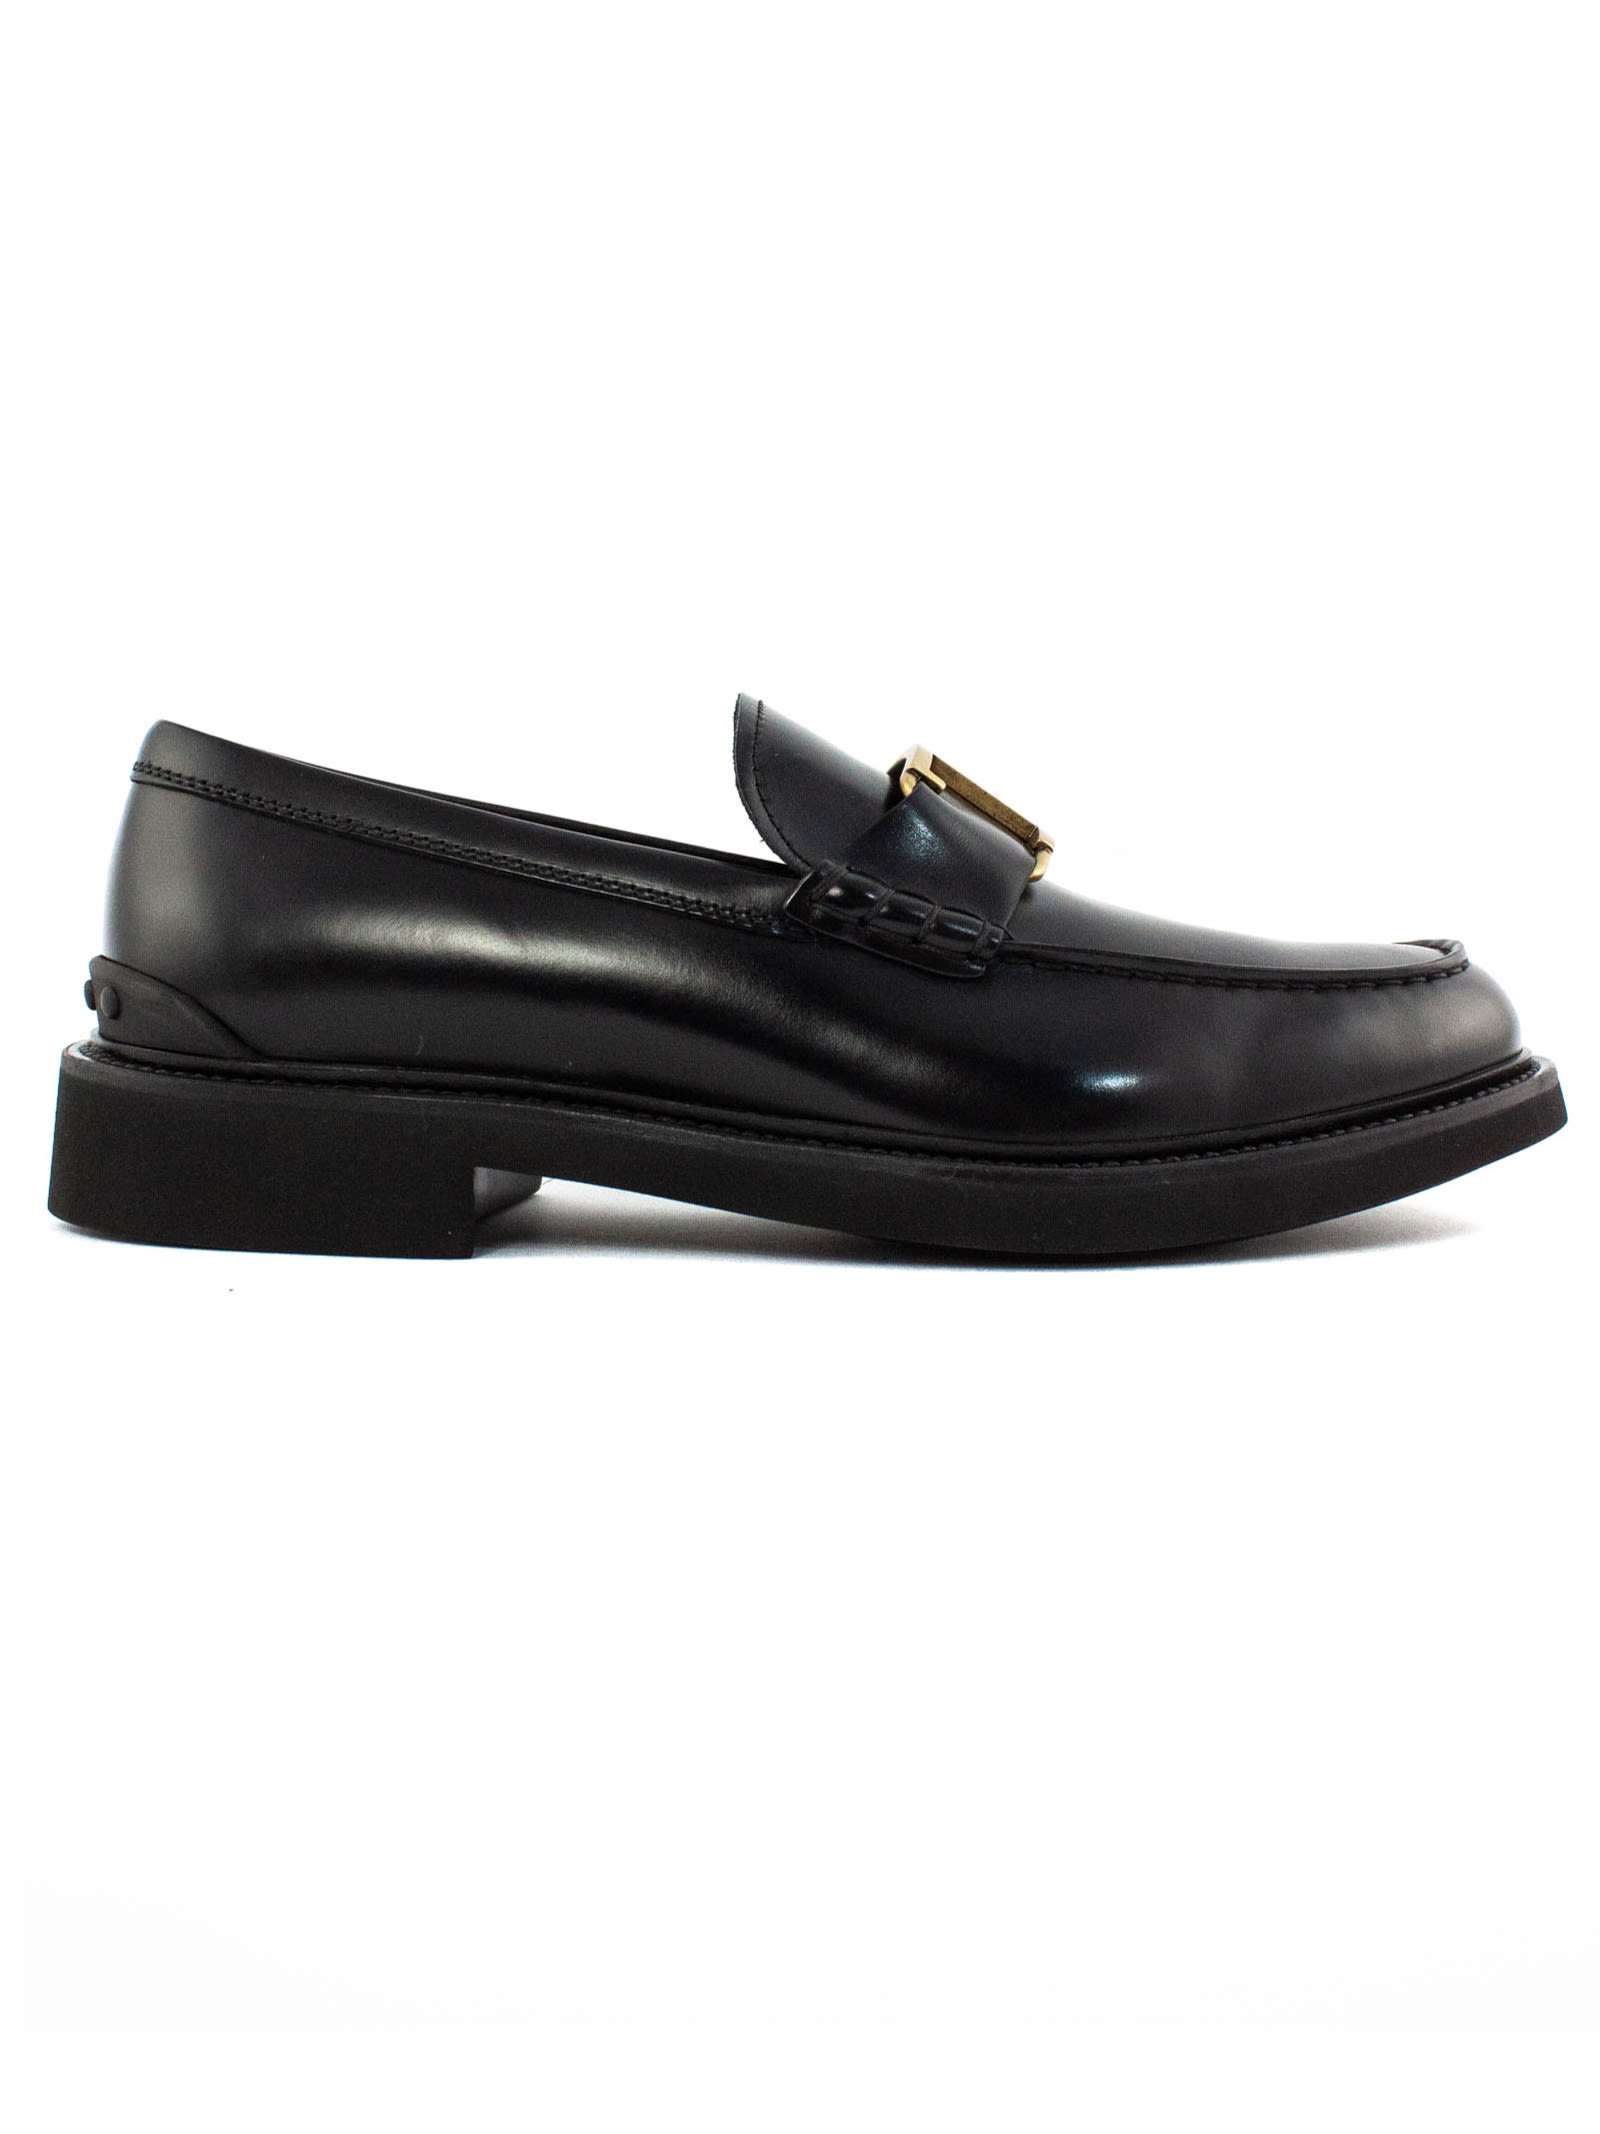 Tods Loafers In Black Semi-shiny Leather